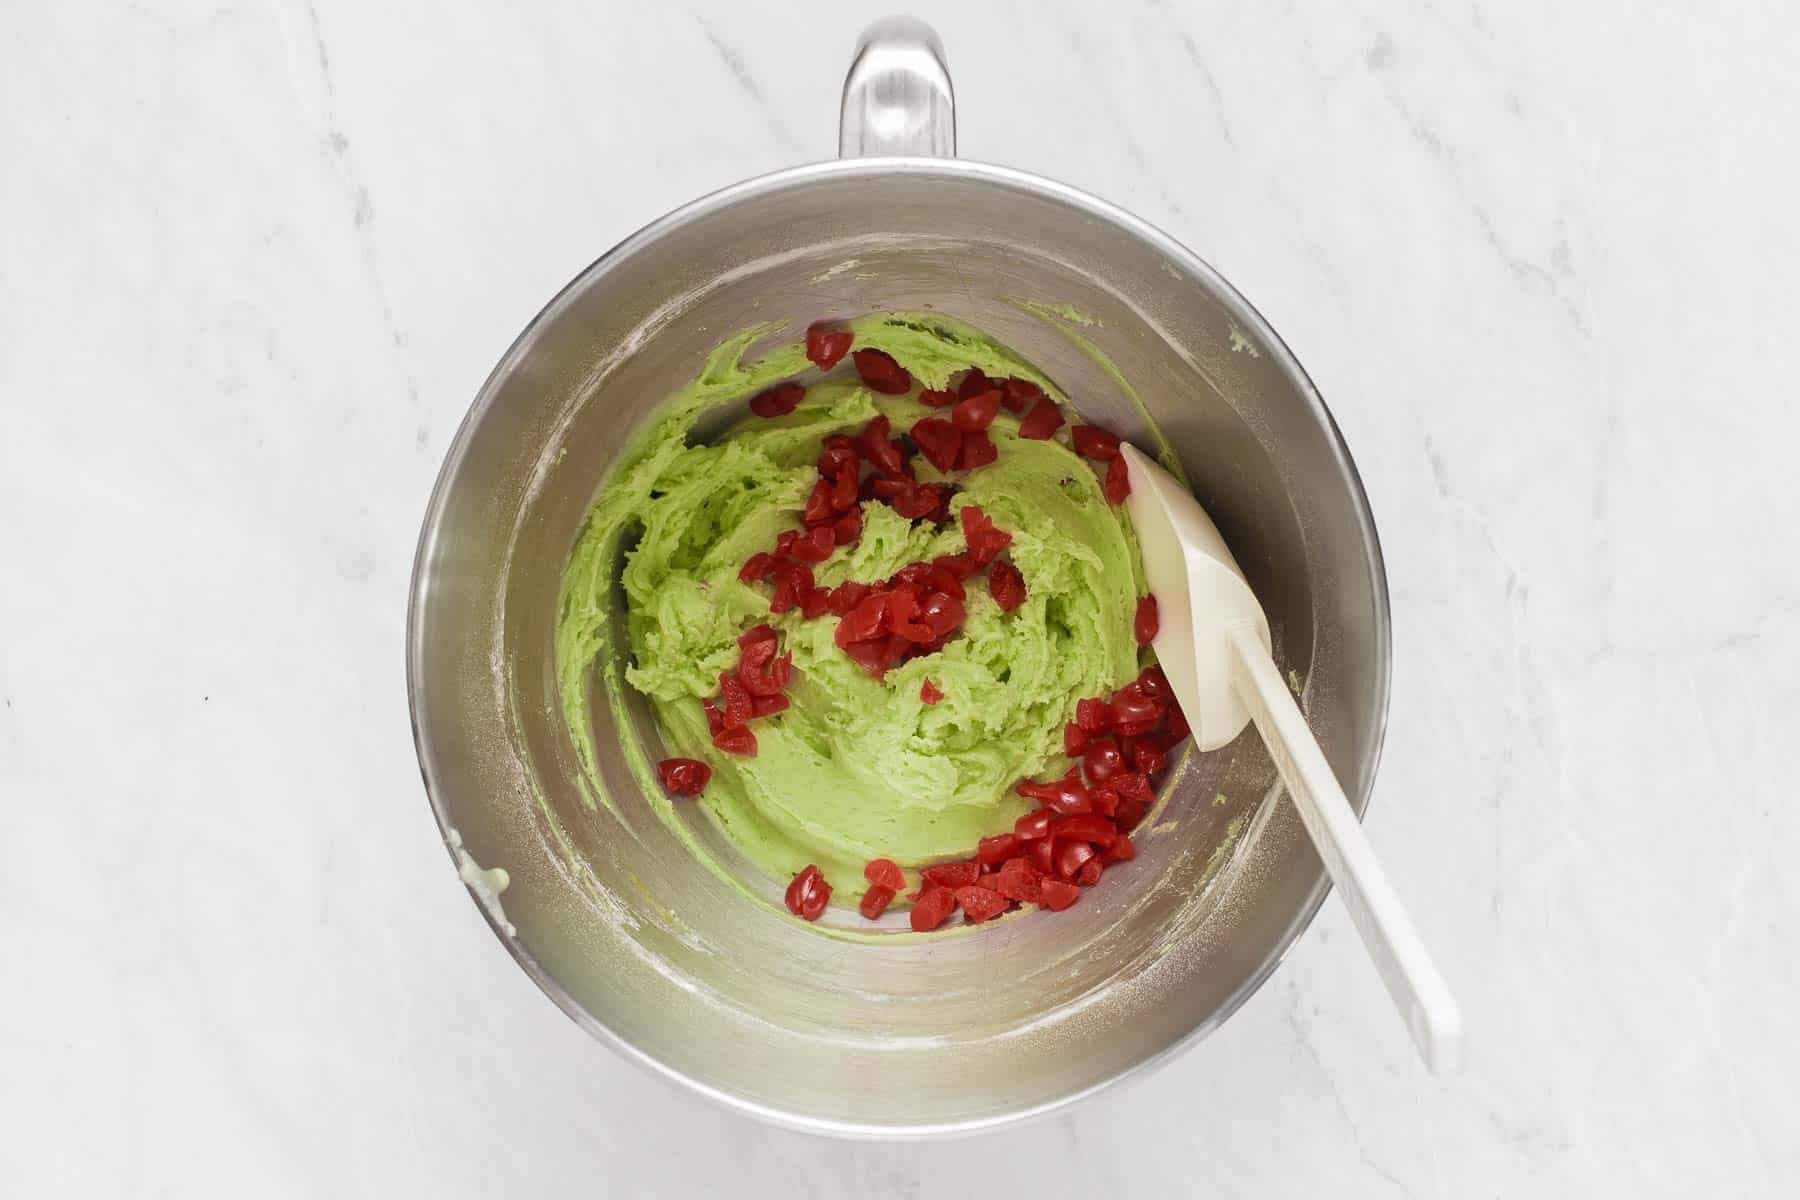 Stirring bright red cherries into green dough.